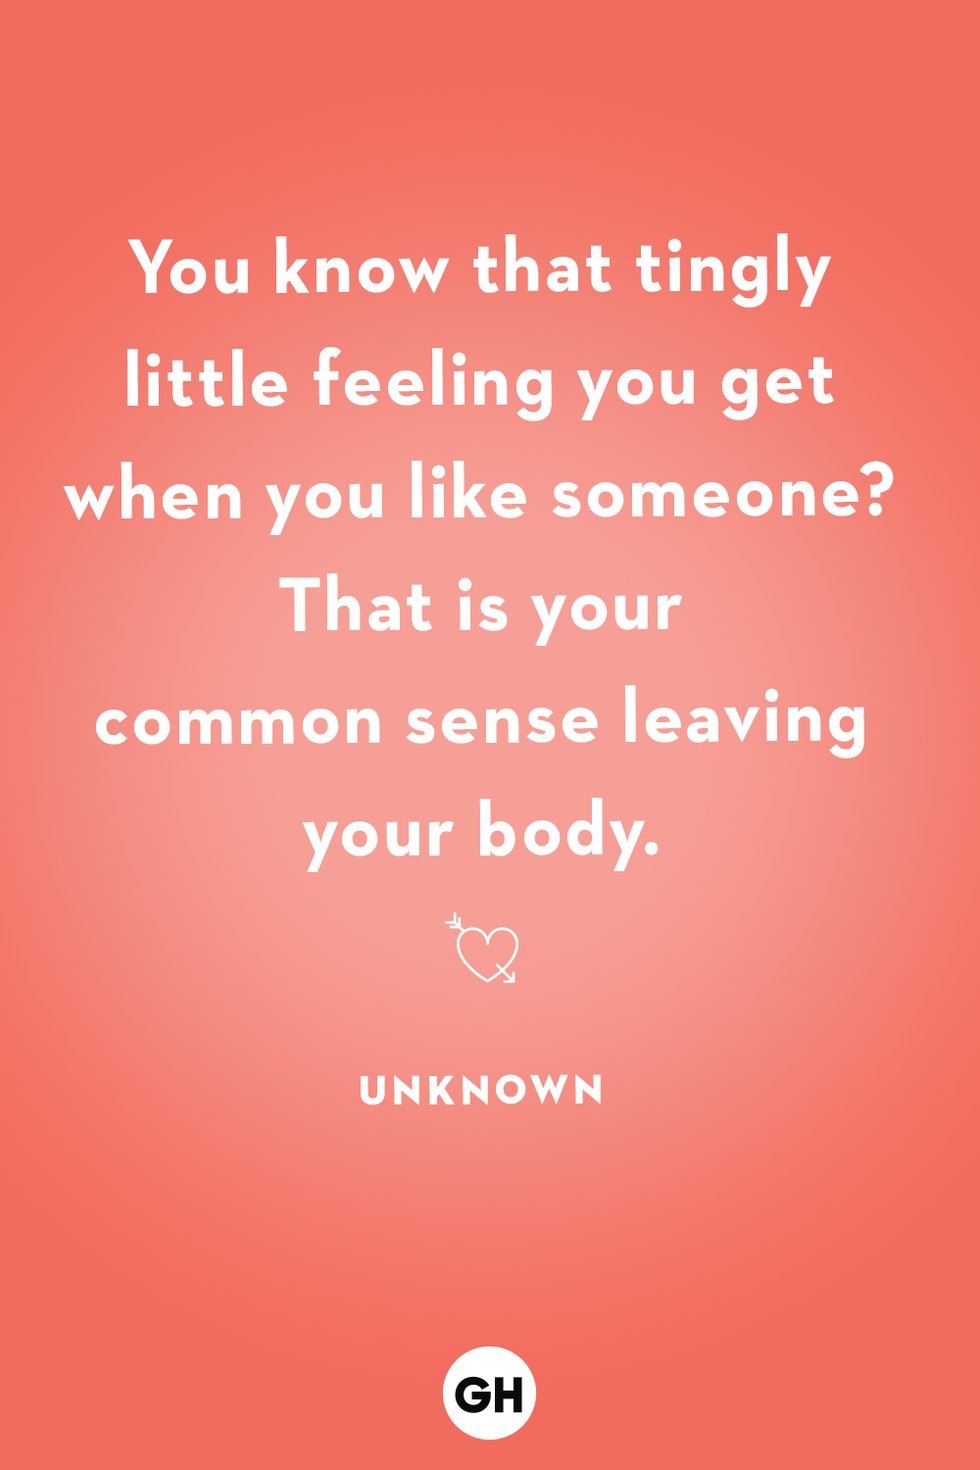 you know that tingly little feeling you get when you like someone that is your common sense leaving your body unknown